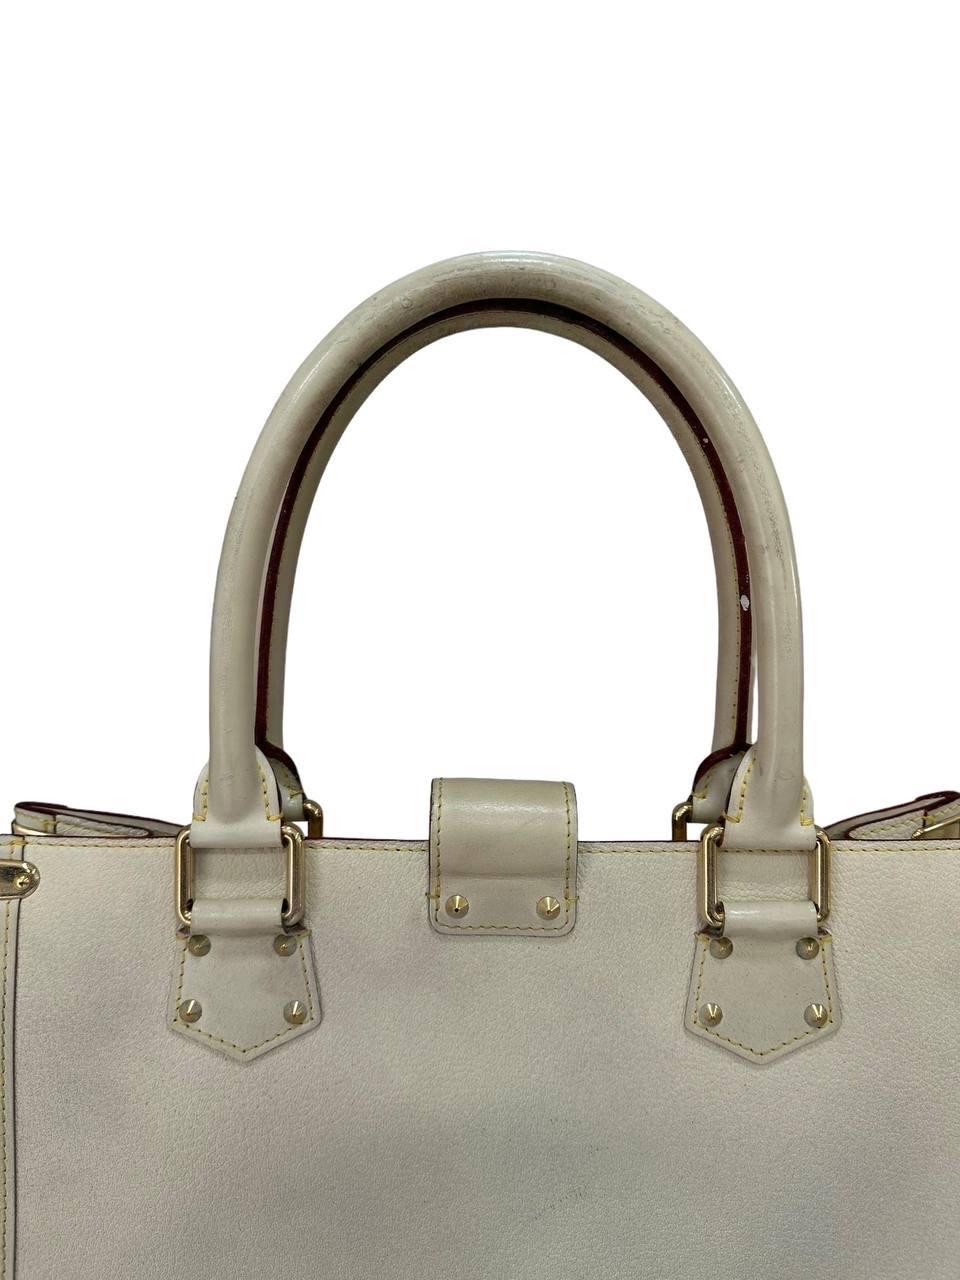 Louis Vuitton White Leather Suhali le Fabuleaux Shoulder Bag In Good Condition For Sale In Torre Del Greco, IT